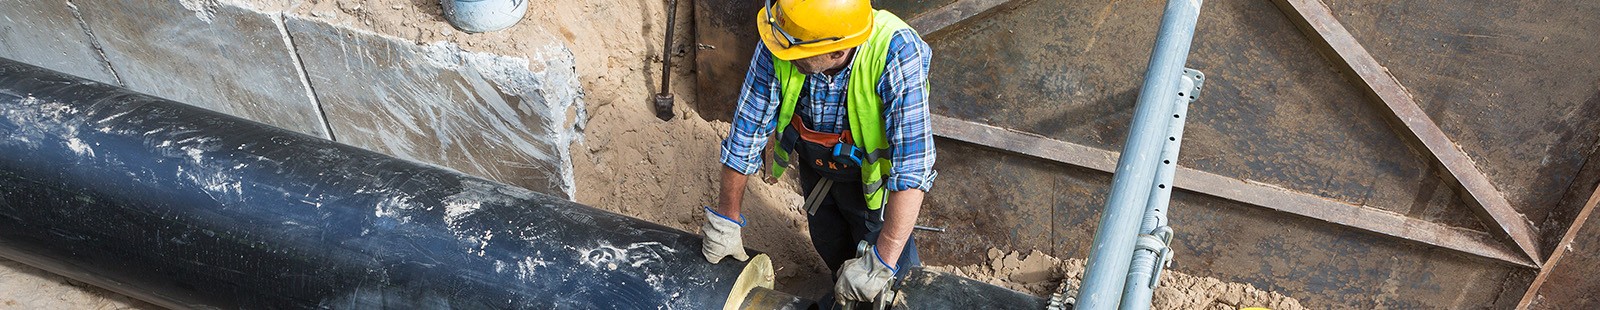 Removing Sewer Blockage safely